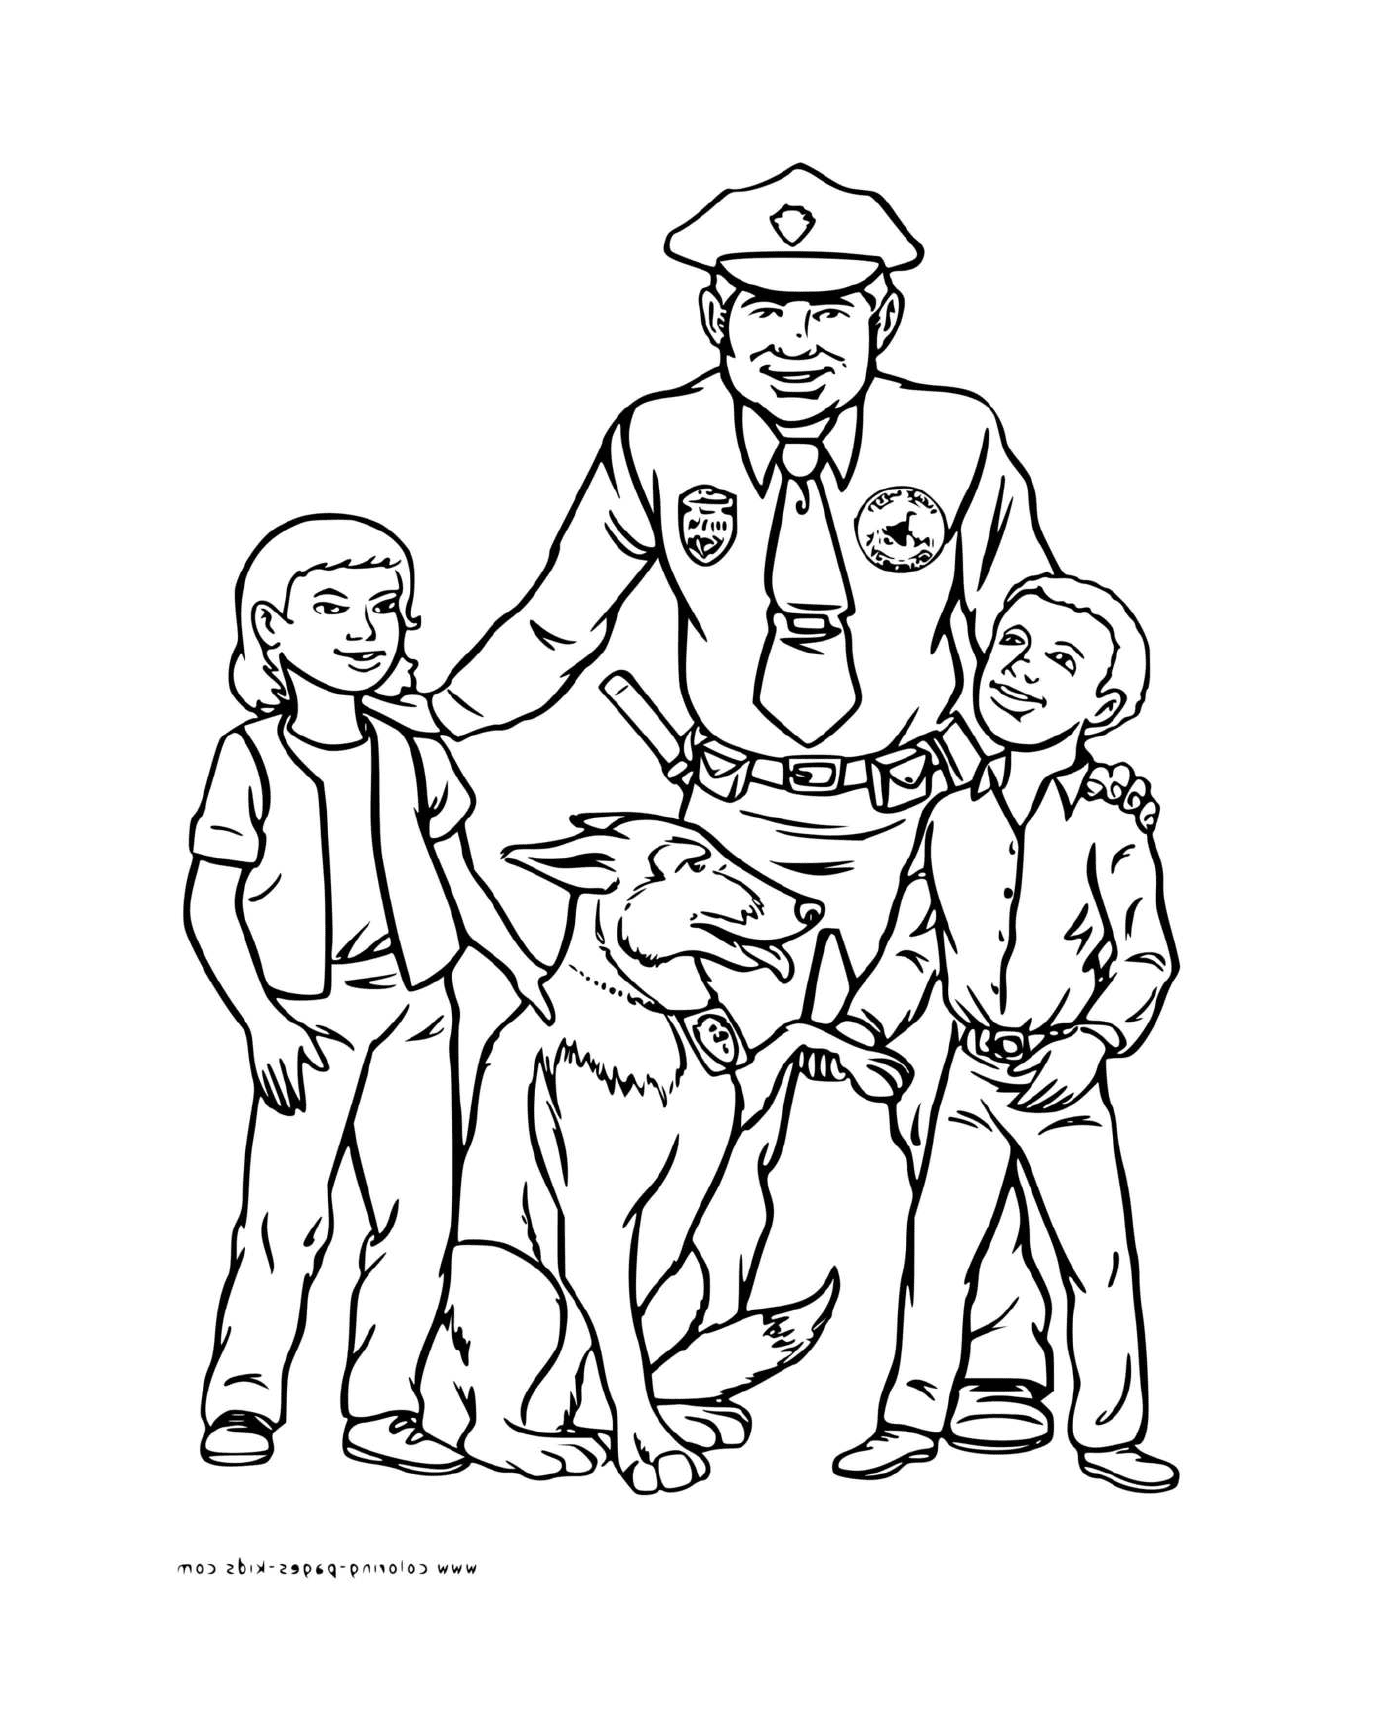  Policeman with two children and dog 